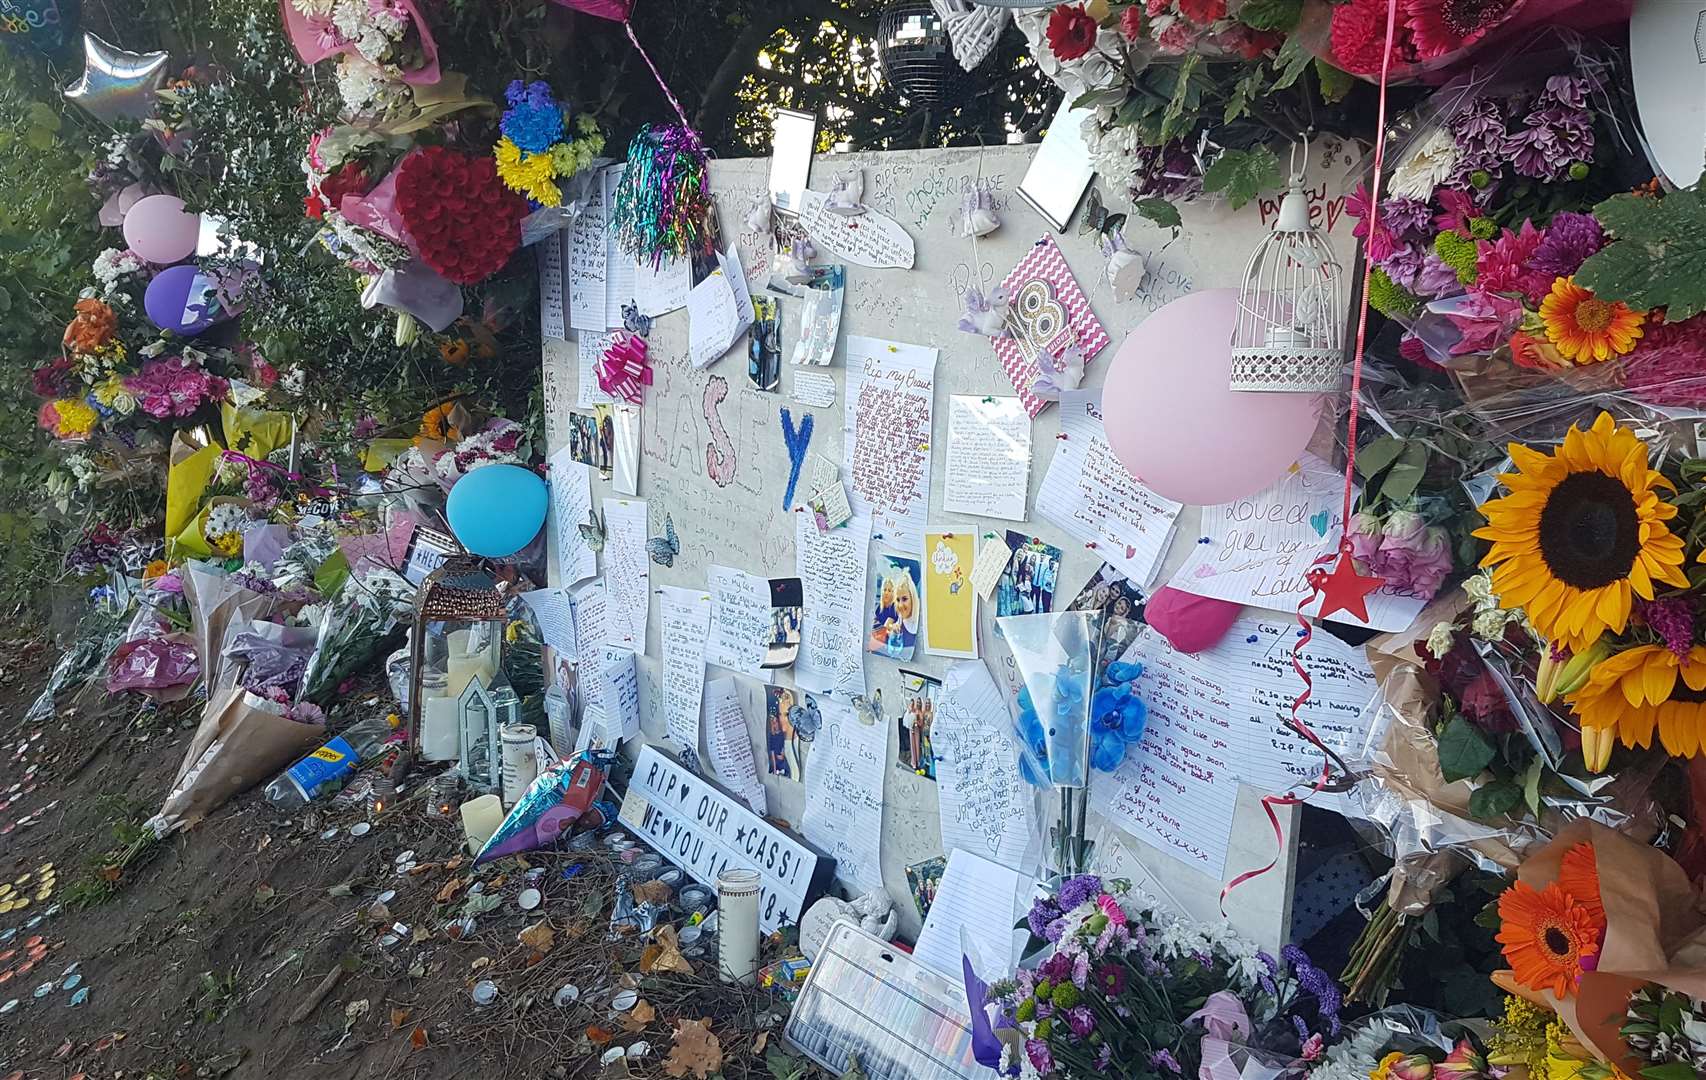 Tributes to Casey Hood were left at the roadside